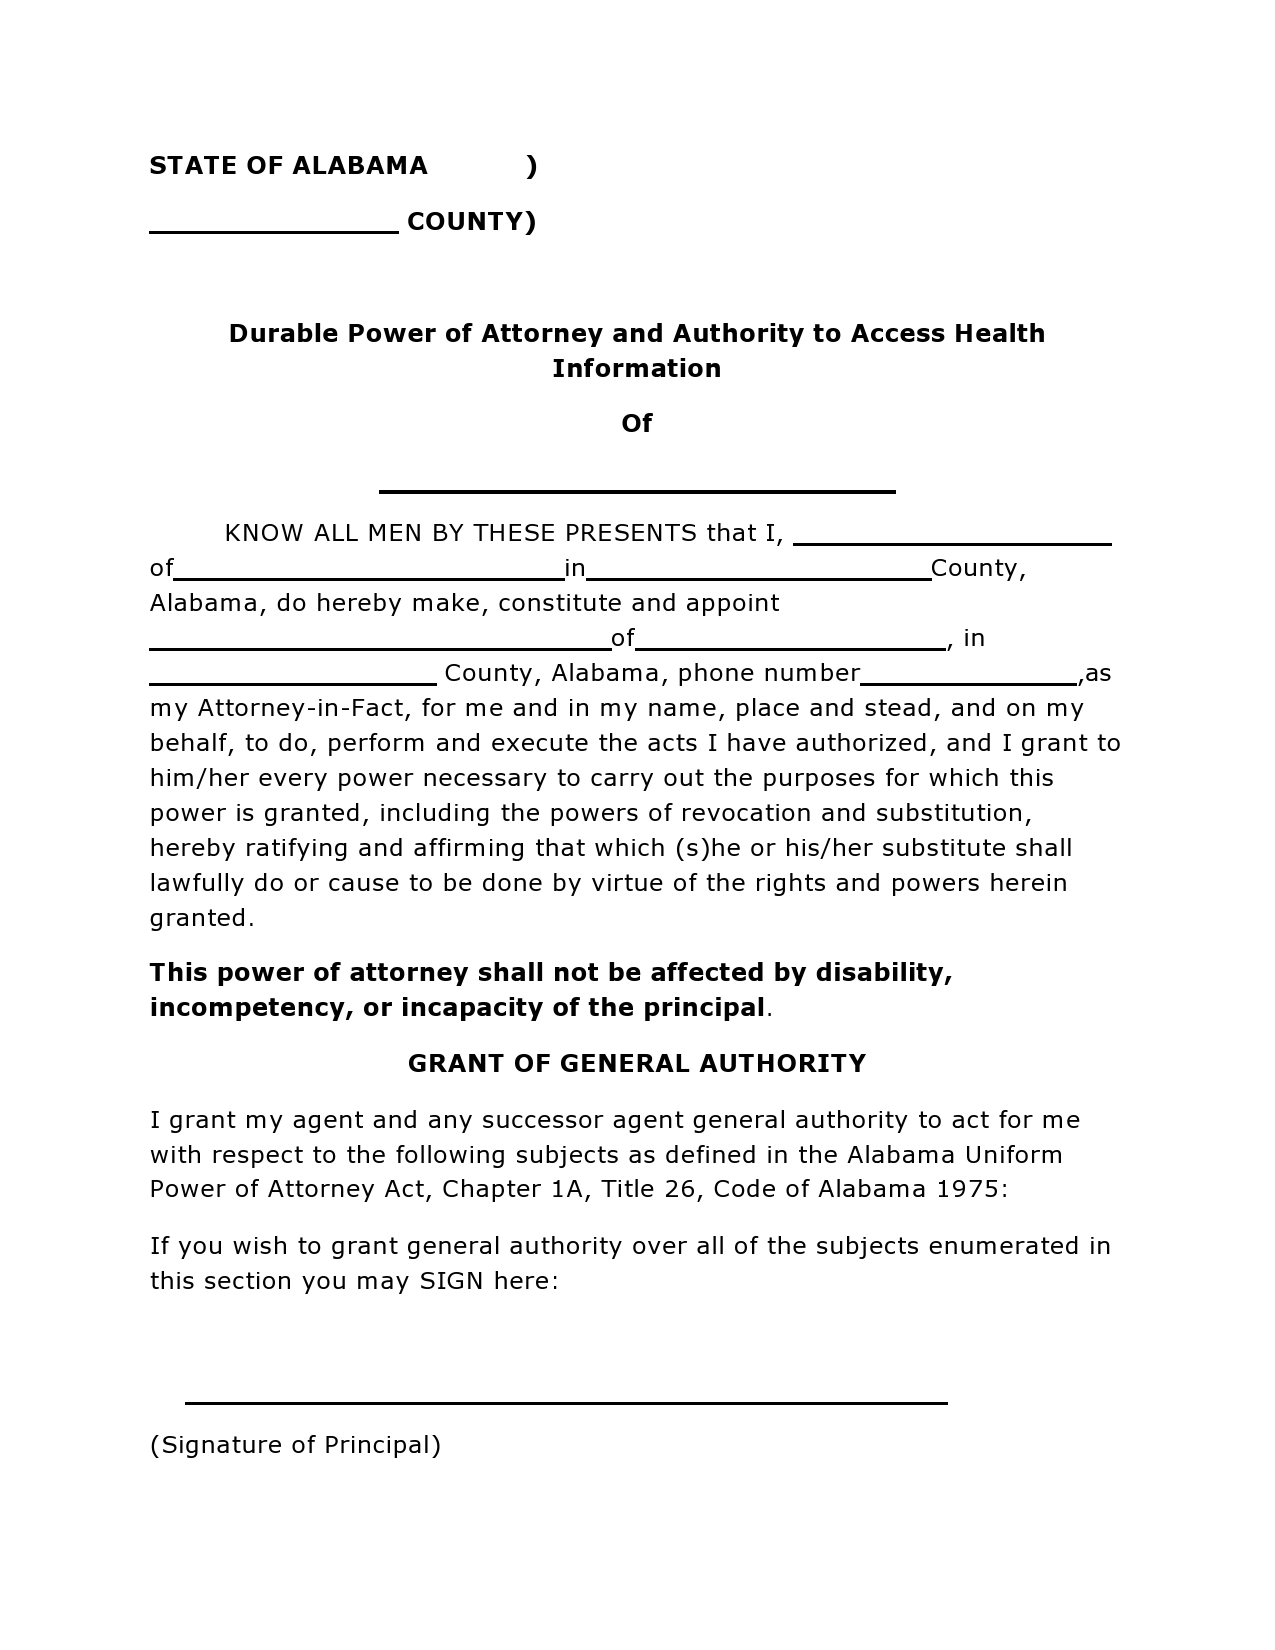 Free durable power of attorney 22